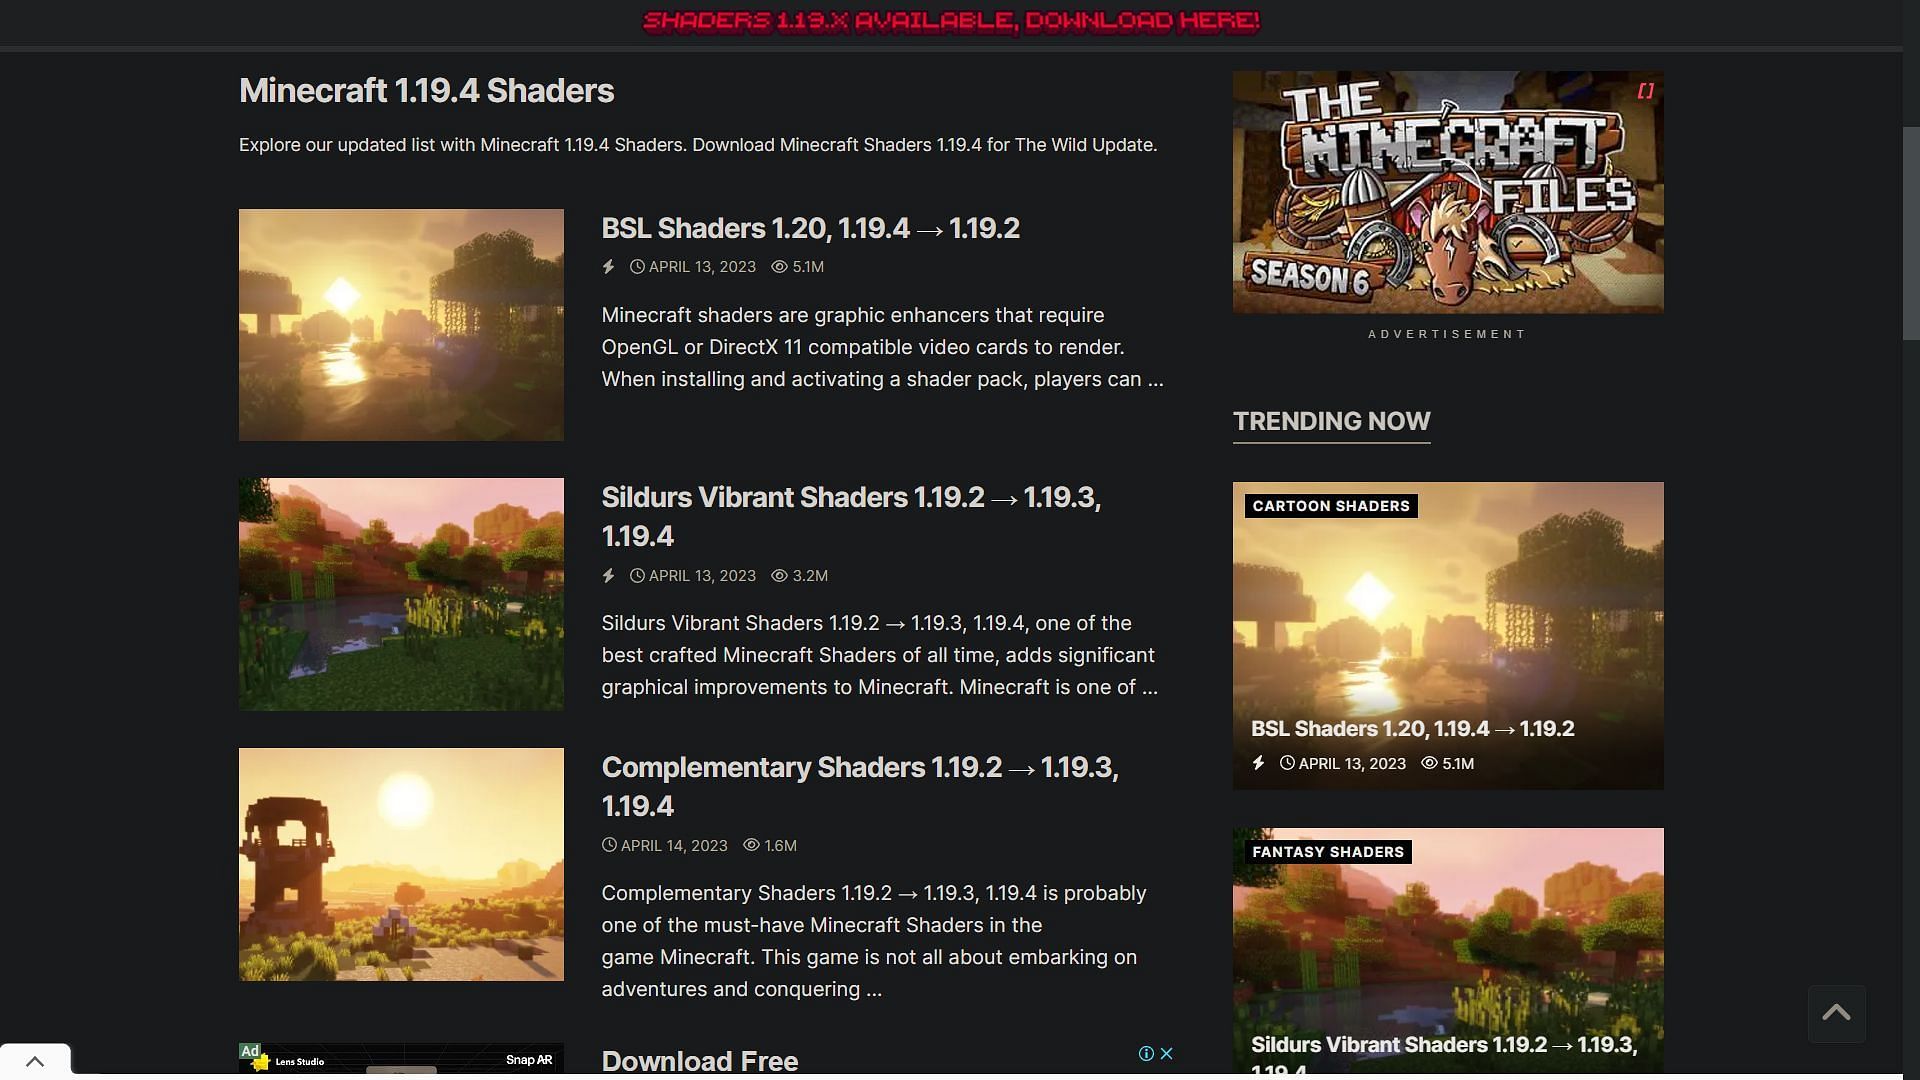 Shaders for Minecraft 1.19.4 can be found on several websites (Image via Sportskeeda)